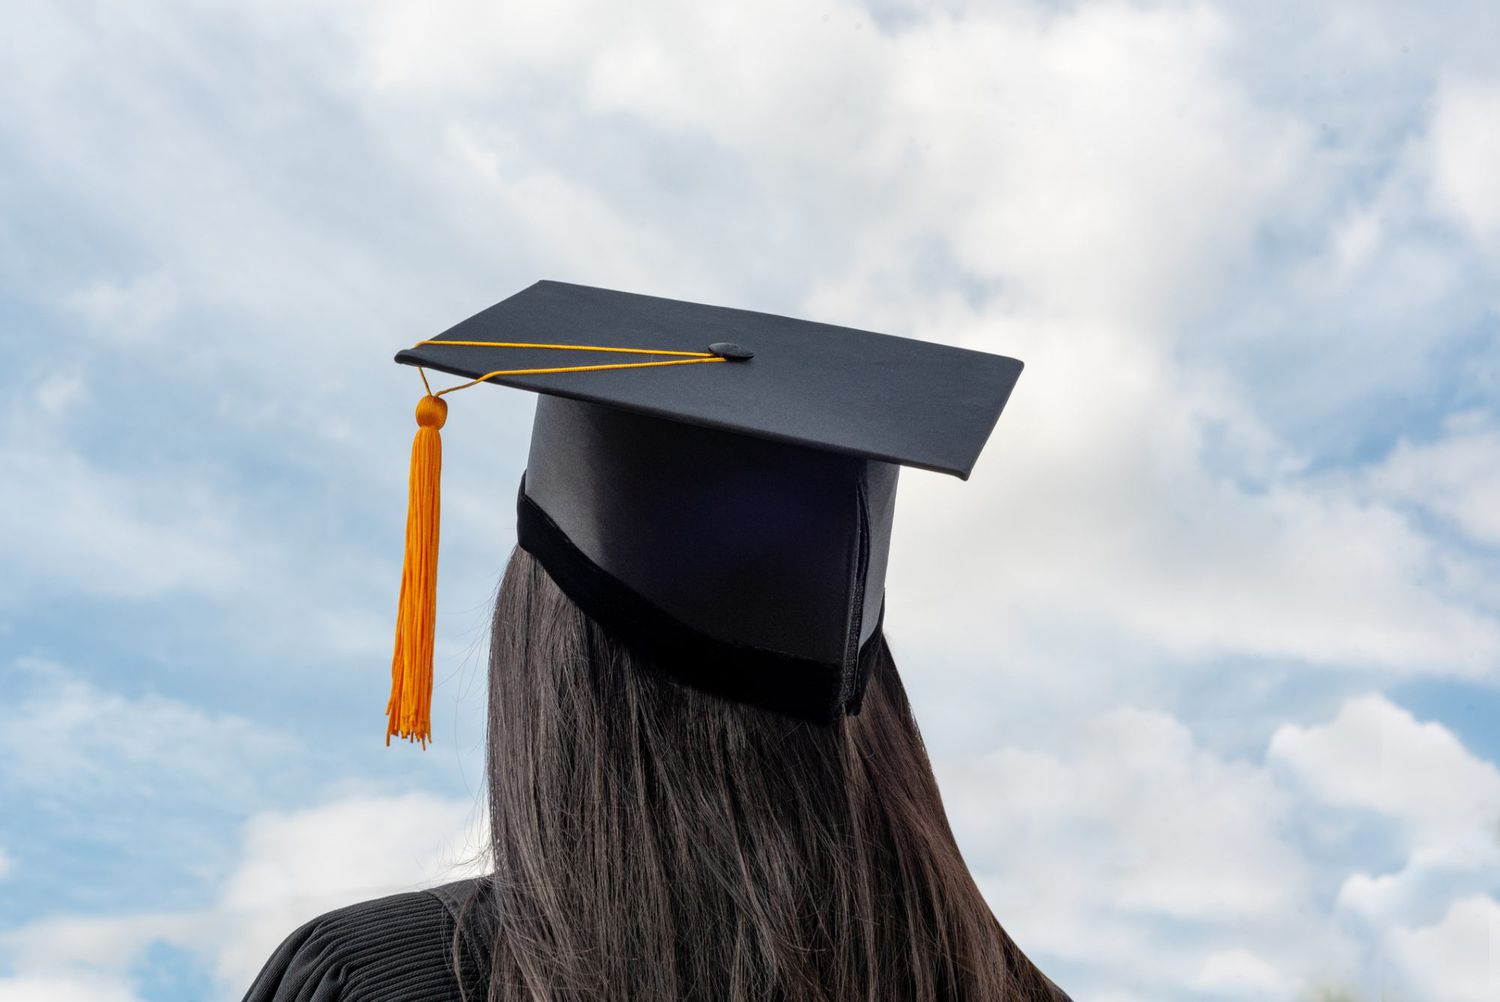 An image of a girl in a graduation cap and gown.